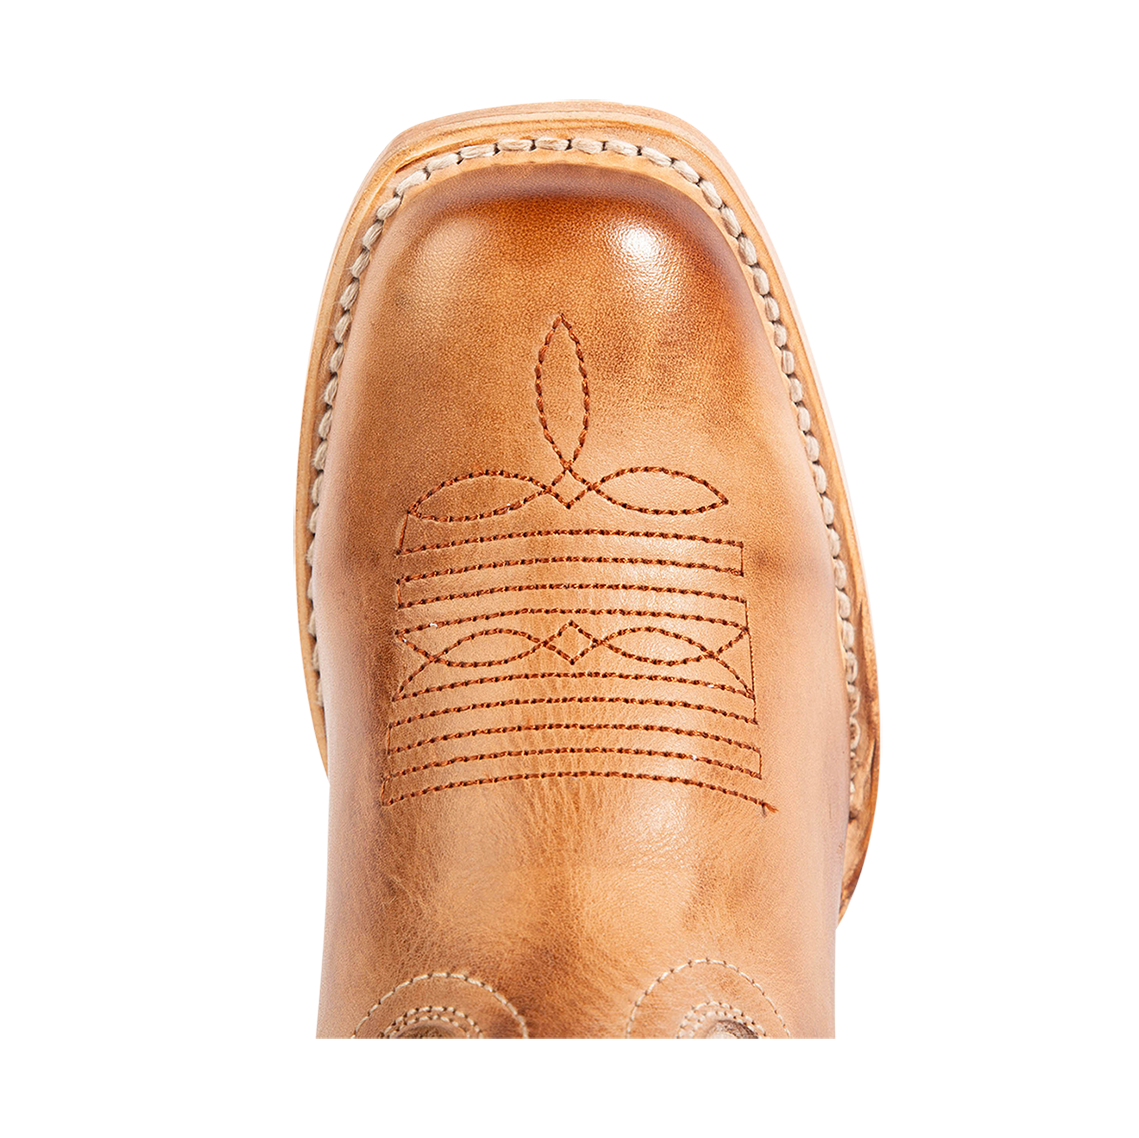 Top view showing square toe construction with stitch detailing on FREEBIRD women's Dice beige leather boot